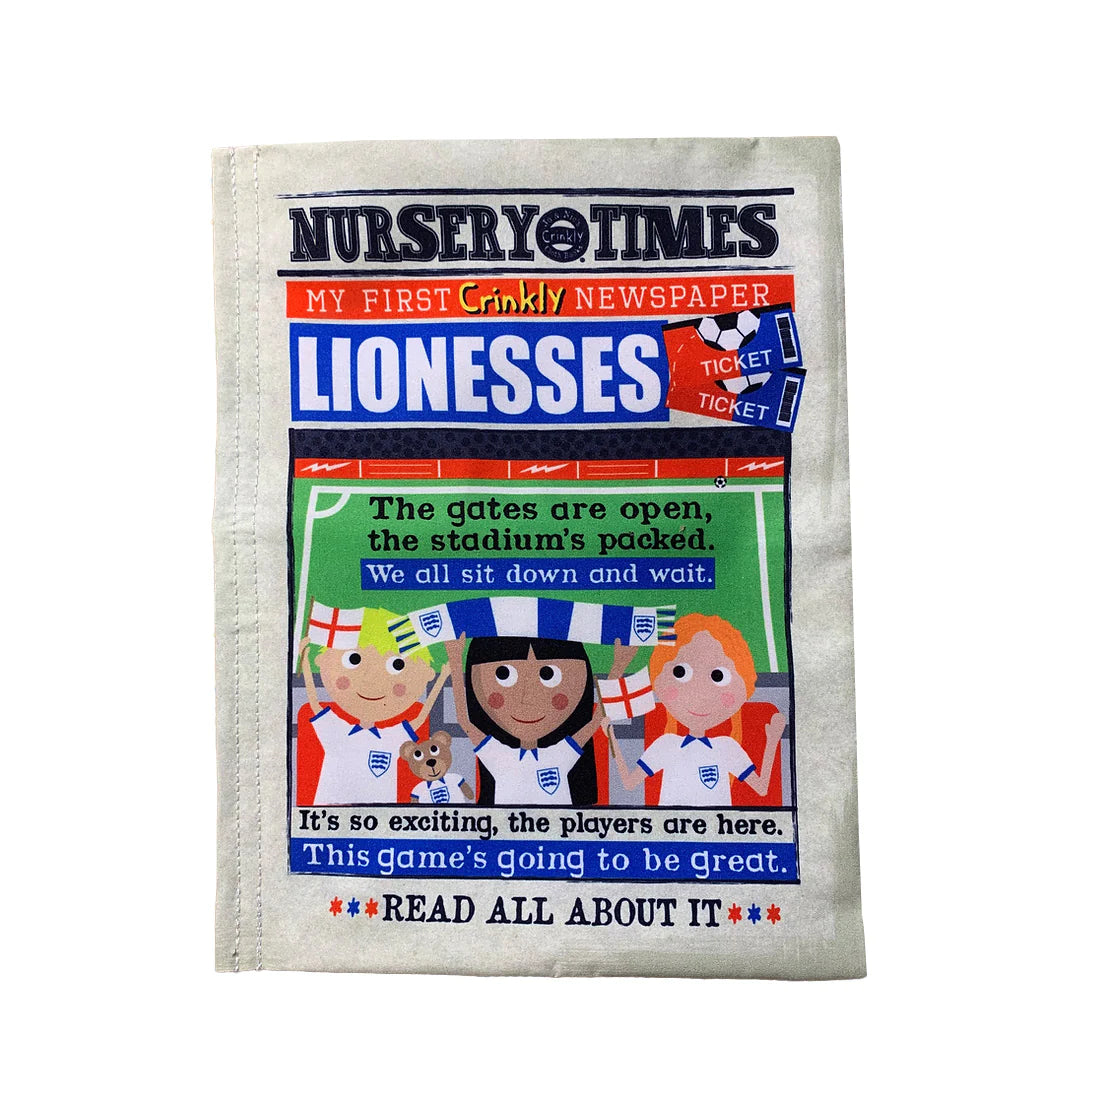 Lionesses - Nursery Times Crinkly Newspaper